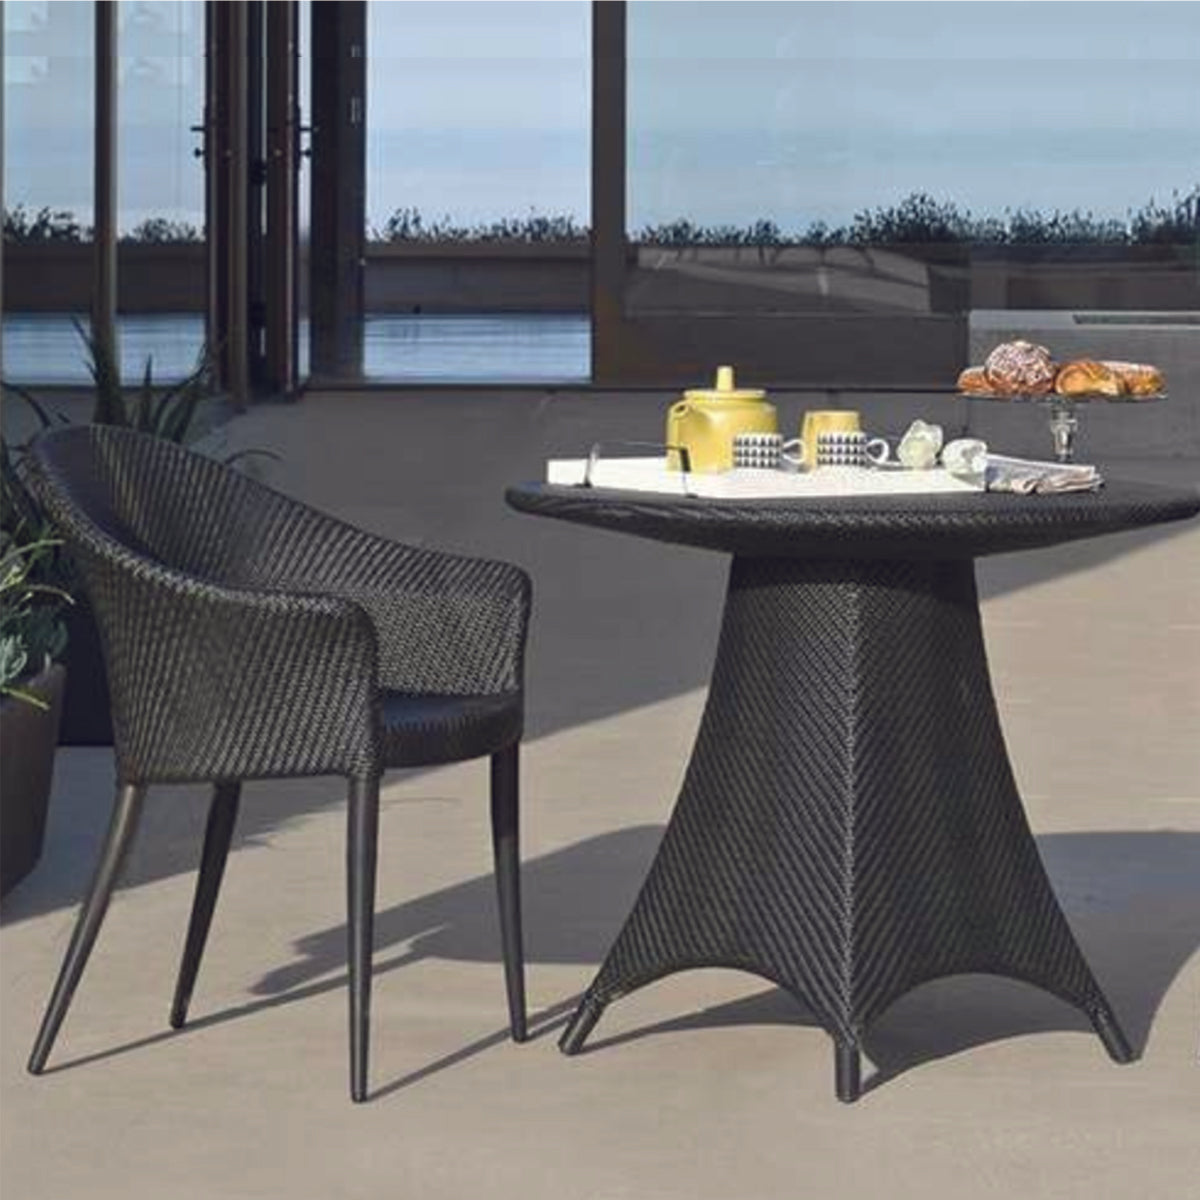 <b>VDC 631</b><br>Wing Design Balcony Set with Table in Wicker